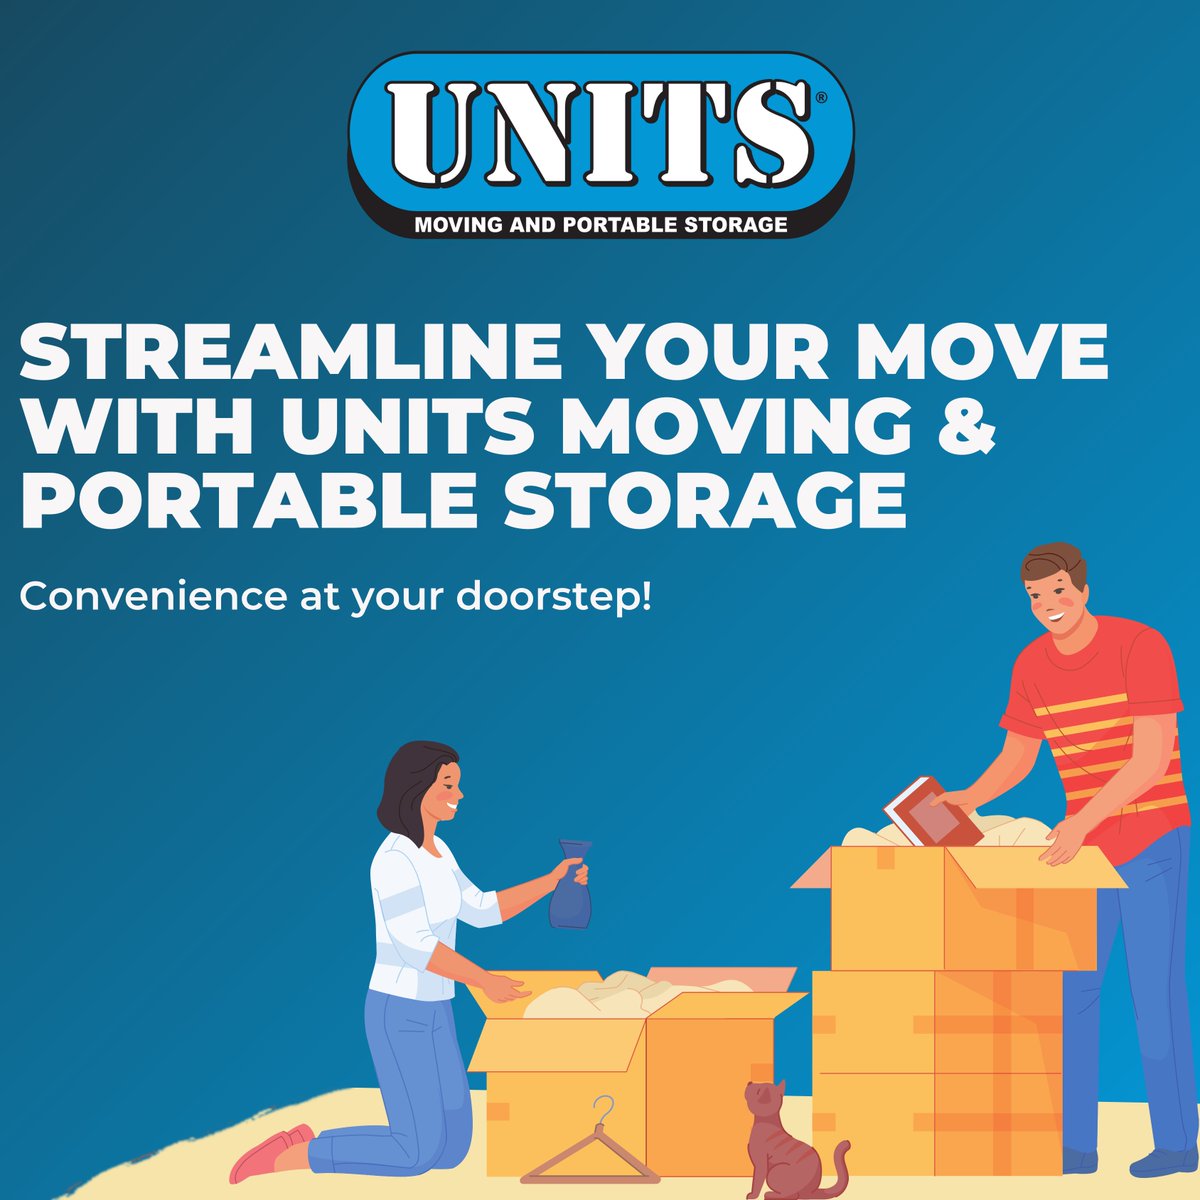 Ready to simplify your move? 📦✨ With UNITS Moving & Portable Storage, convenience comes to you! Say goodbye to the hassle of traditional moving and hello to seamless transitions. Let us streamline your move today.